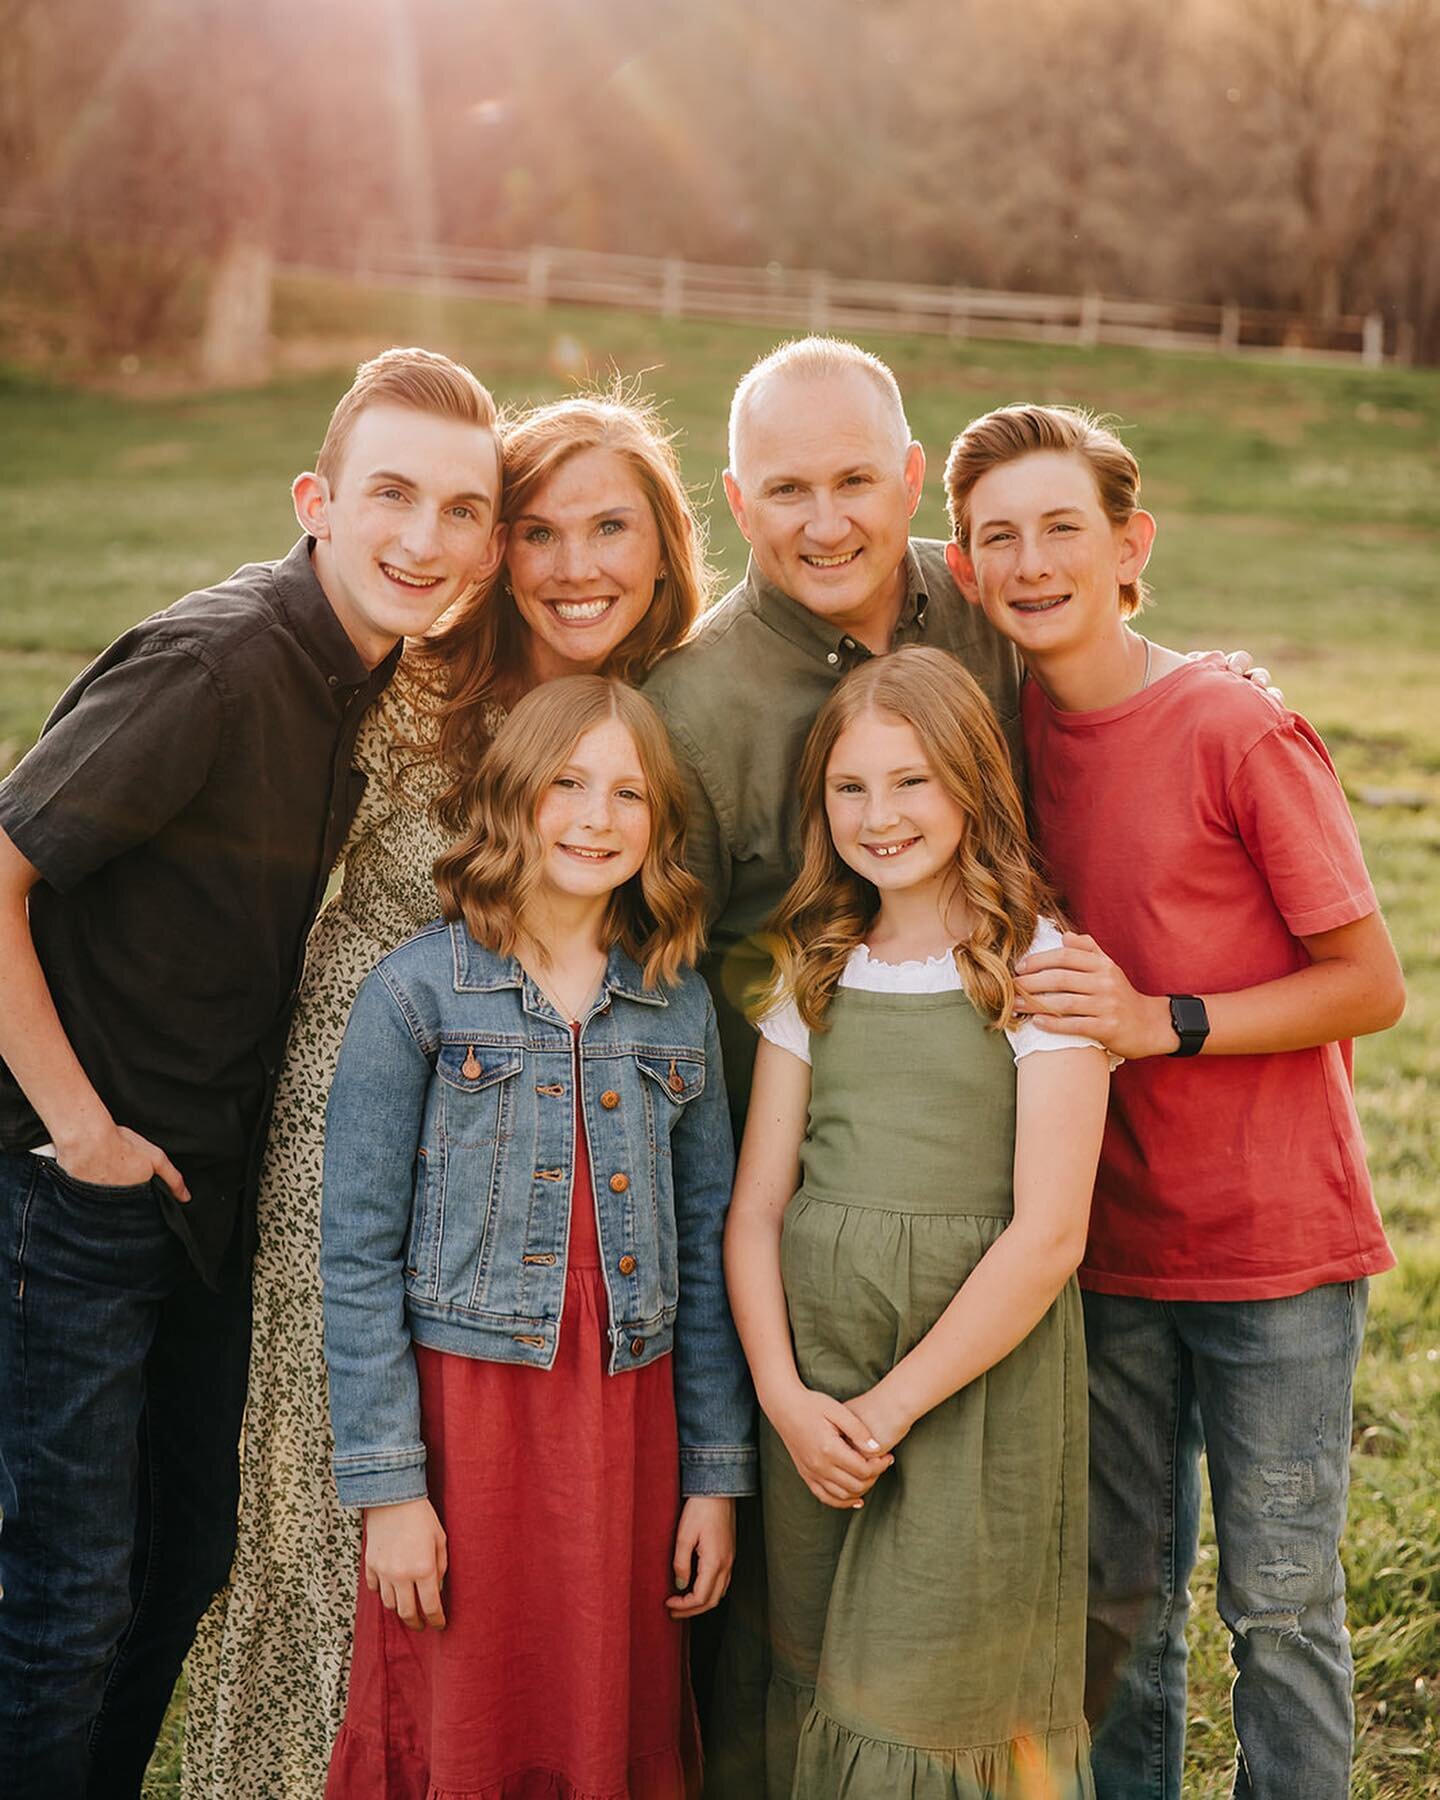 When you&rsquo;re oldest is about to leave the nest, you&rsquo;ve gotta sneak in those family photos! 🥲🤩

.
.
.
.
.
.
.
.
.
.
#calistoddardphotos #calistoddardfamilies #utah #utahphotographer #utahphotography #utahphoto #utahfamilyphotographer #uta